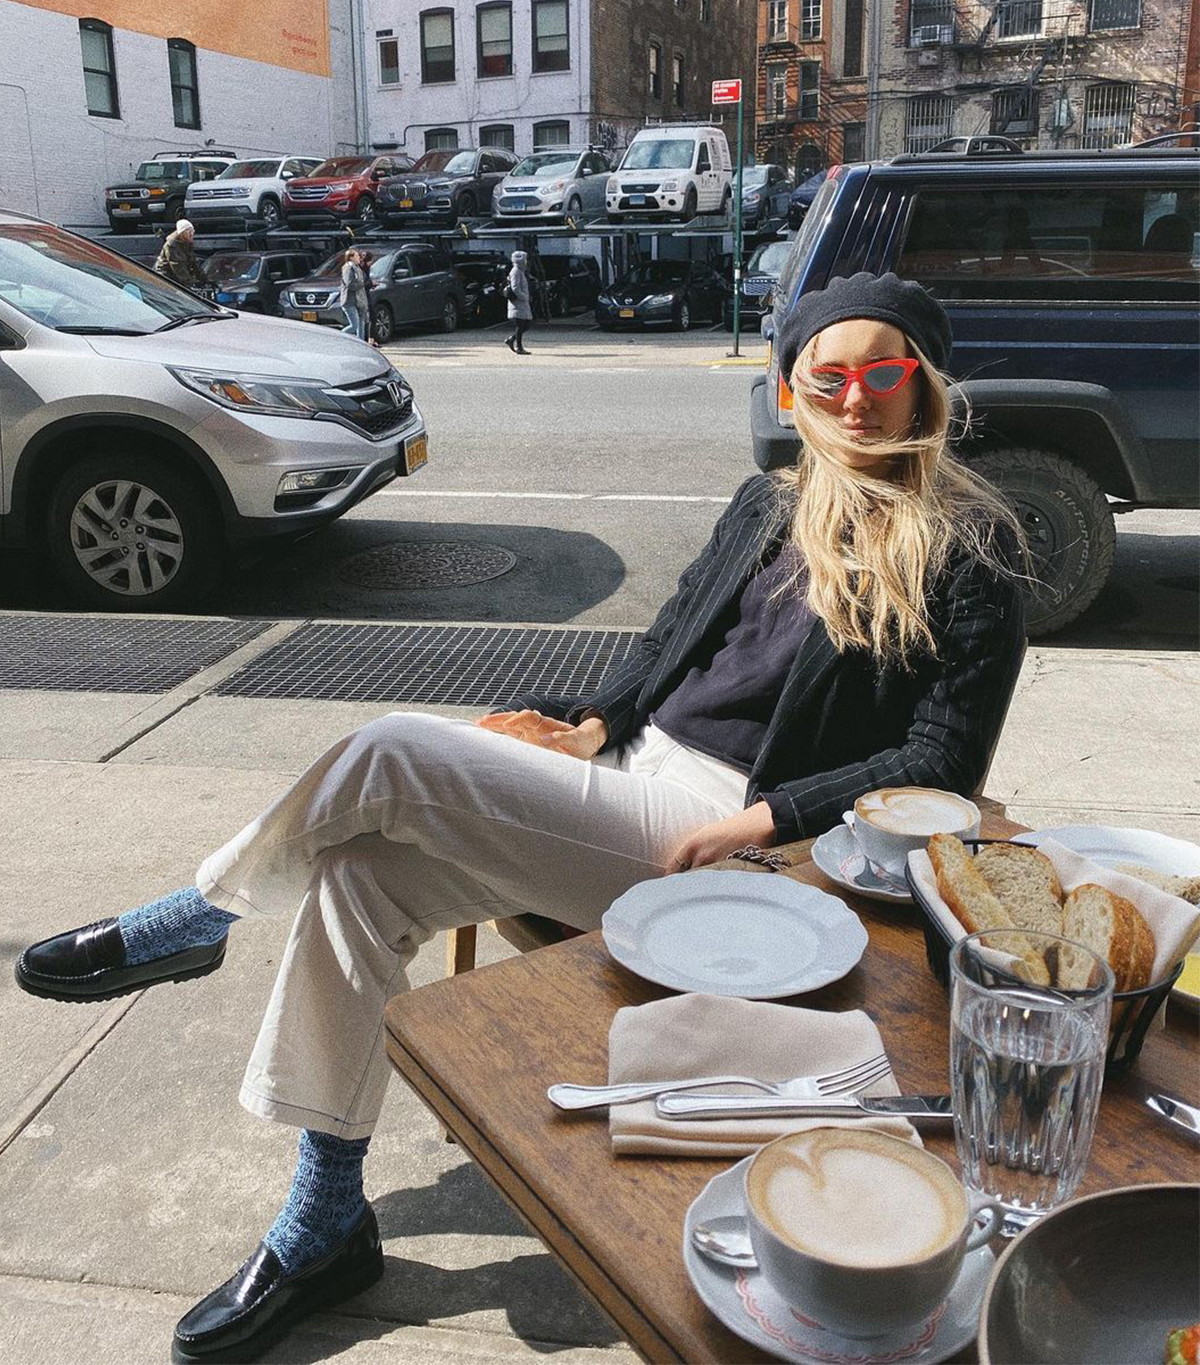 8 Warm Outfit Ideas for Dining Outside When It’s Cold